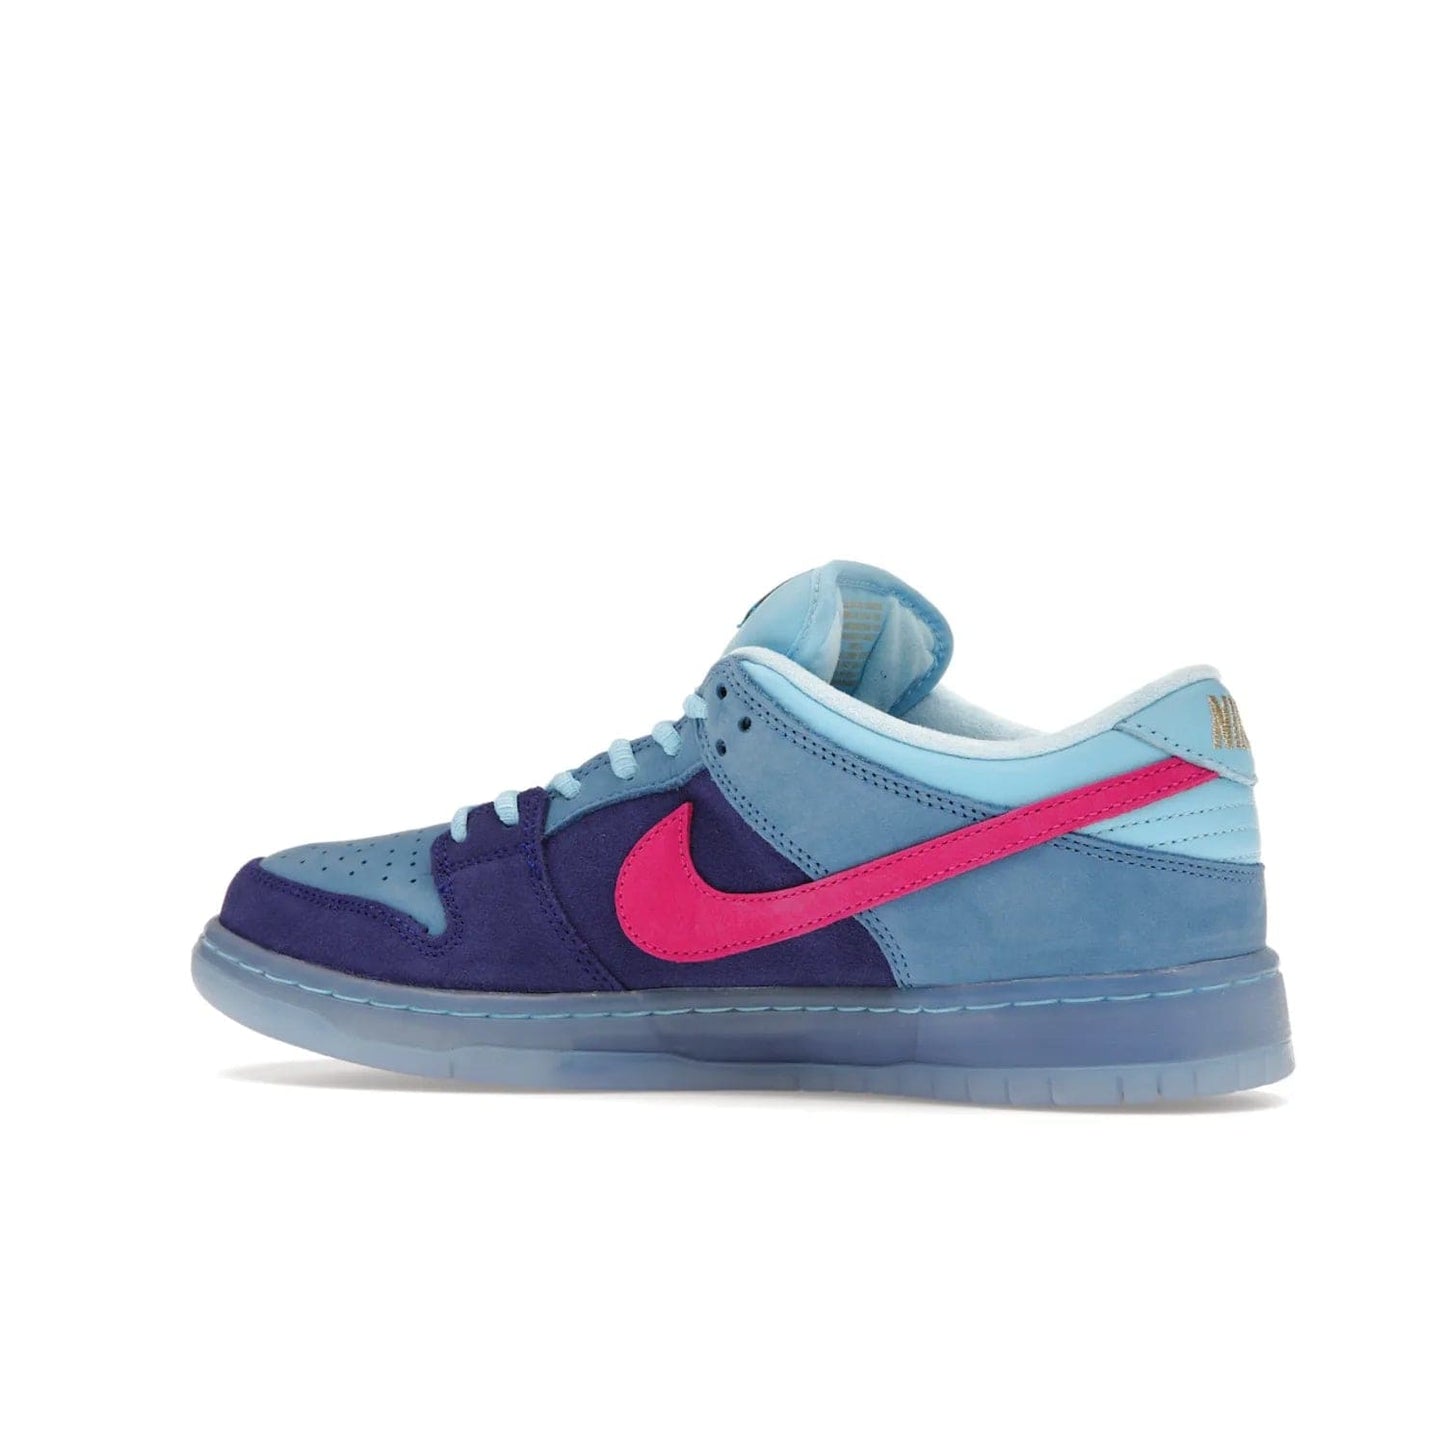 Nike SB Dunk Low Run The Jewels - Image 21 - Only at www.BallersClubKickz.com - The Nike SB Dunk Low Run The Jewels pays tribute to the Run the Jewels 3 album cover. It features a blue suede upper with pink suede accents, gold branding and 3 lace sets. RTJ insoles complete this limited edition sneaker. Get it now for your shoe collection.